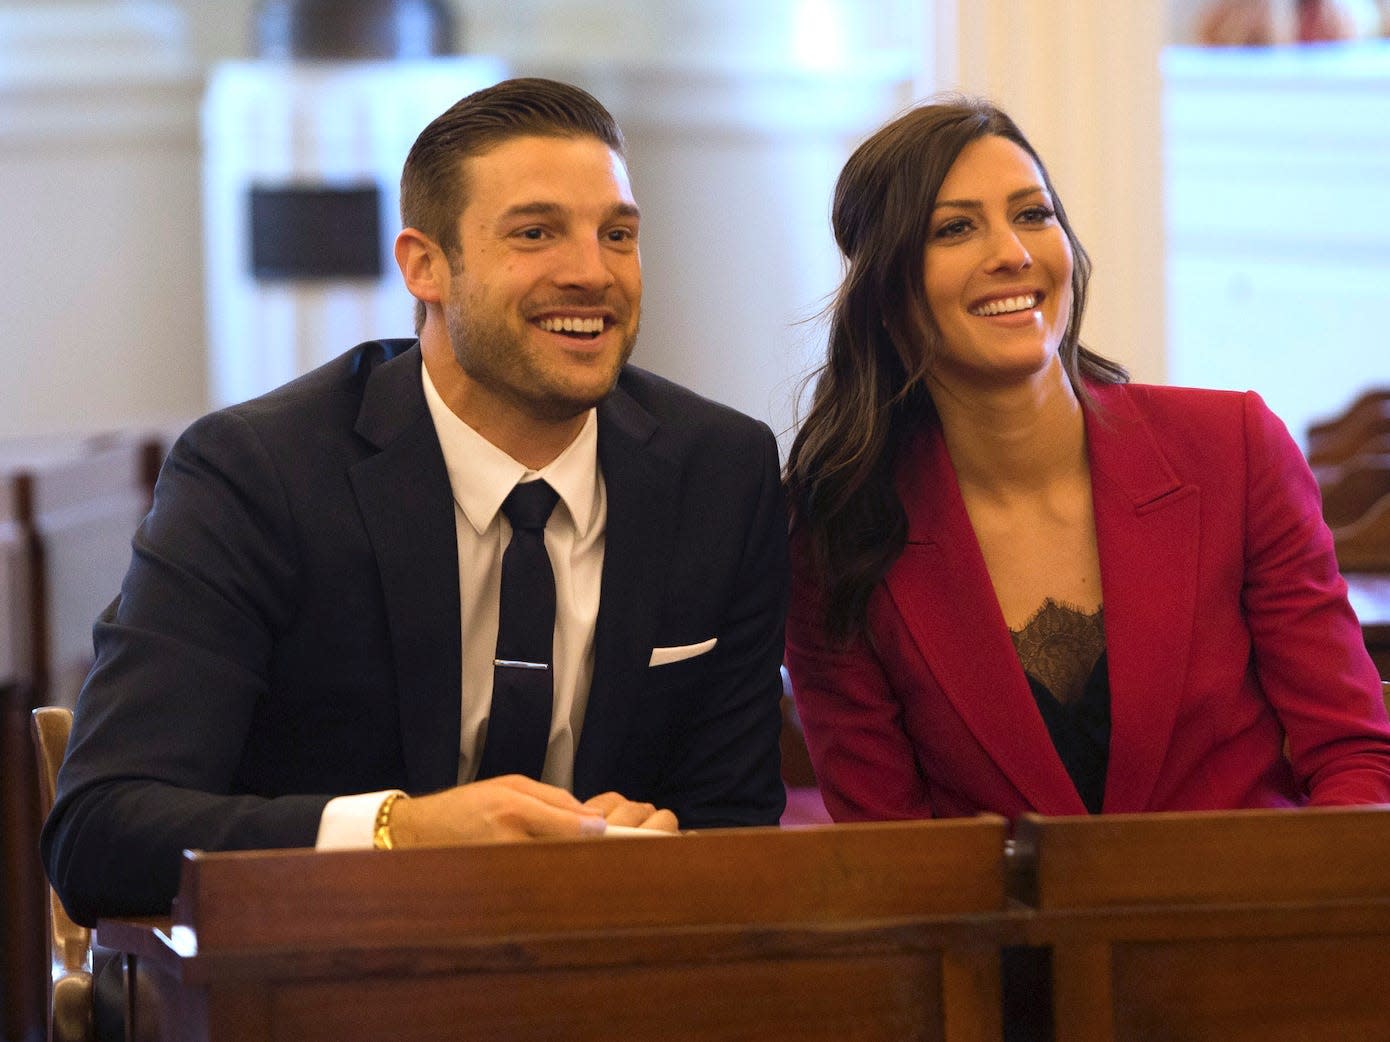 Becca Kufrin reveals that if she were ‘The Bachelorette’ again, she would have immediately asked her men who they voted for in the election